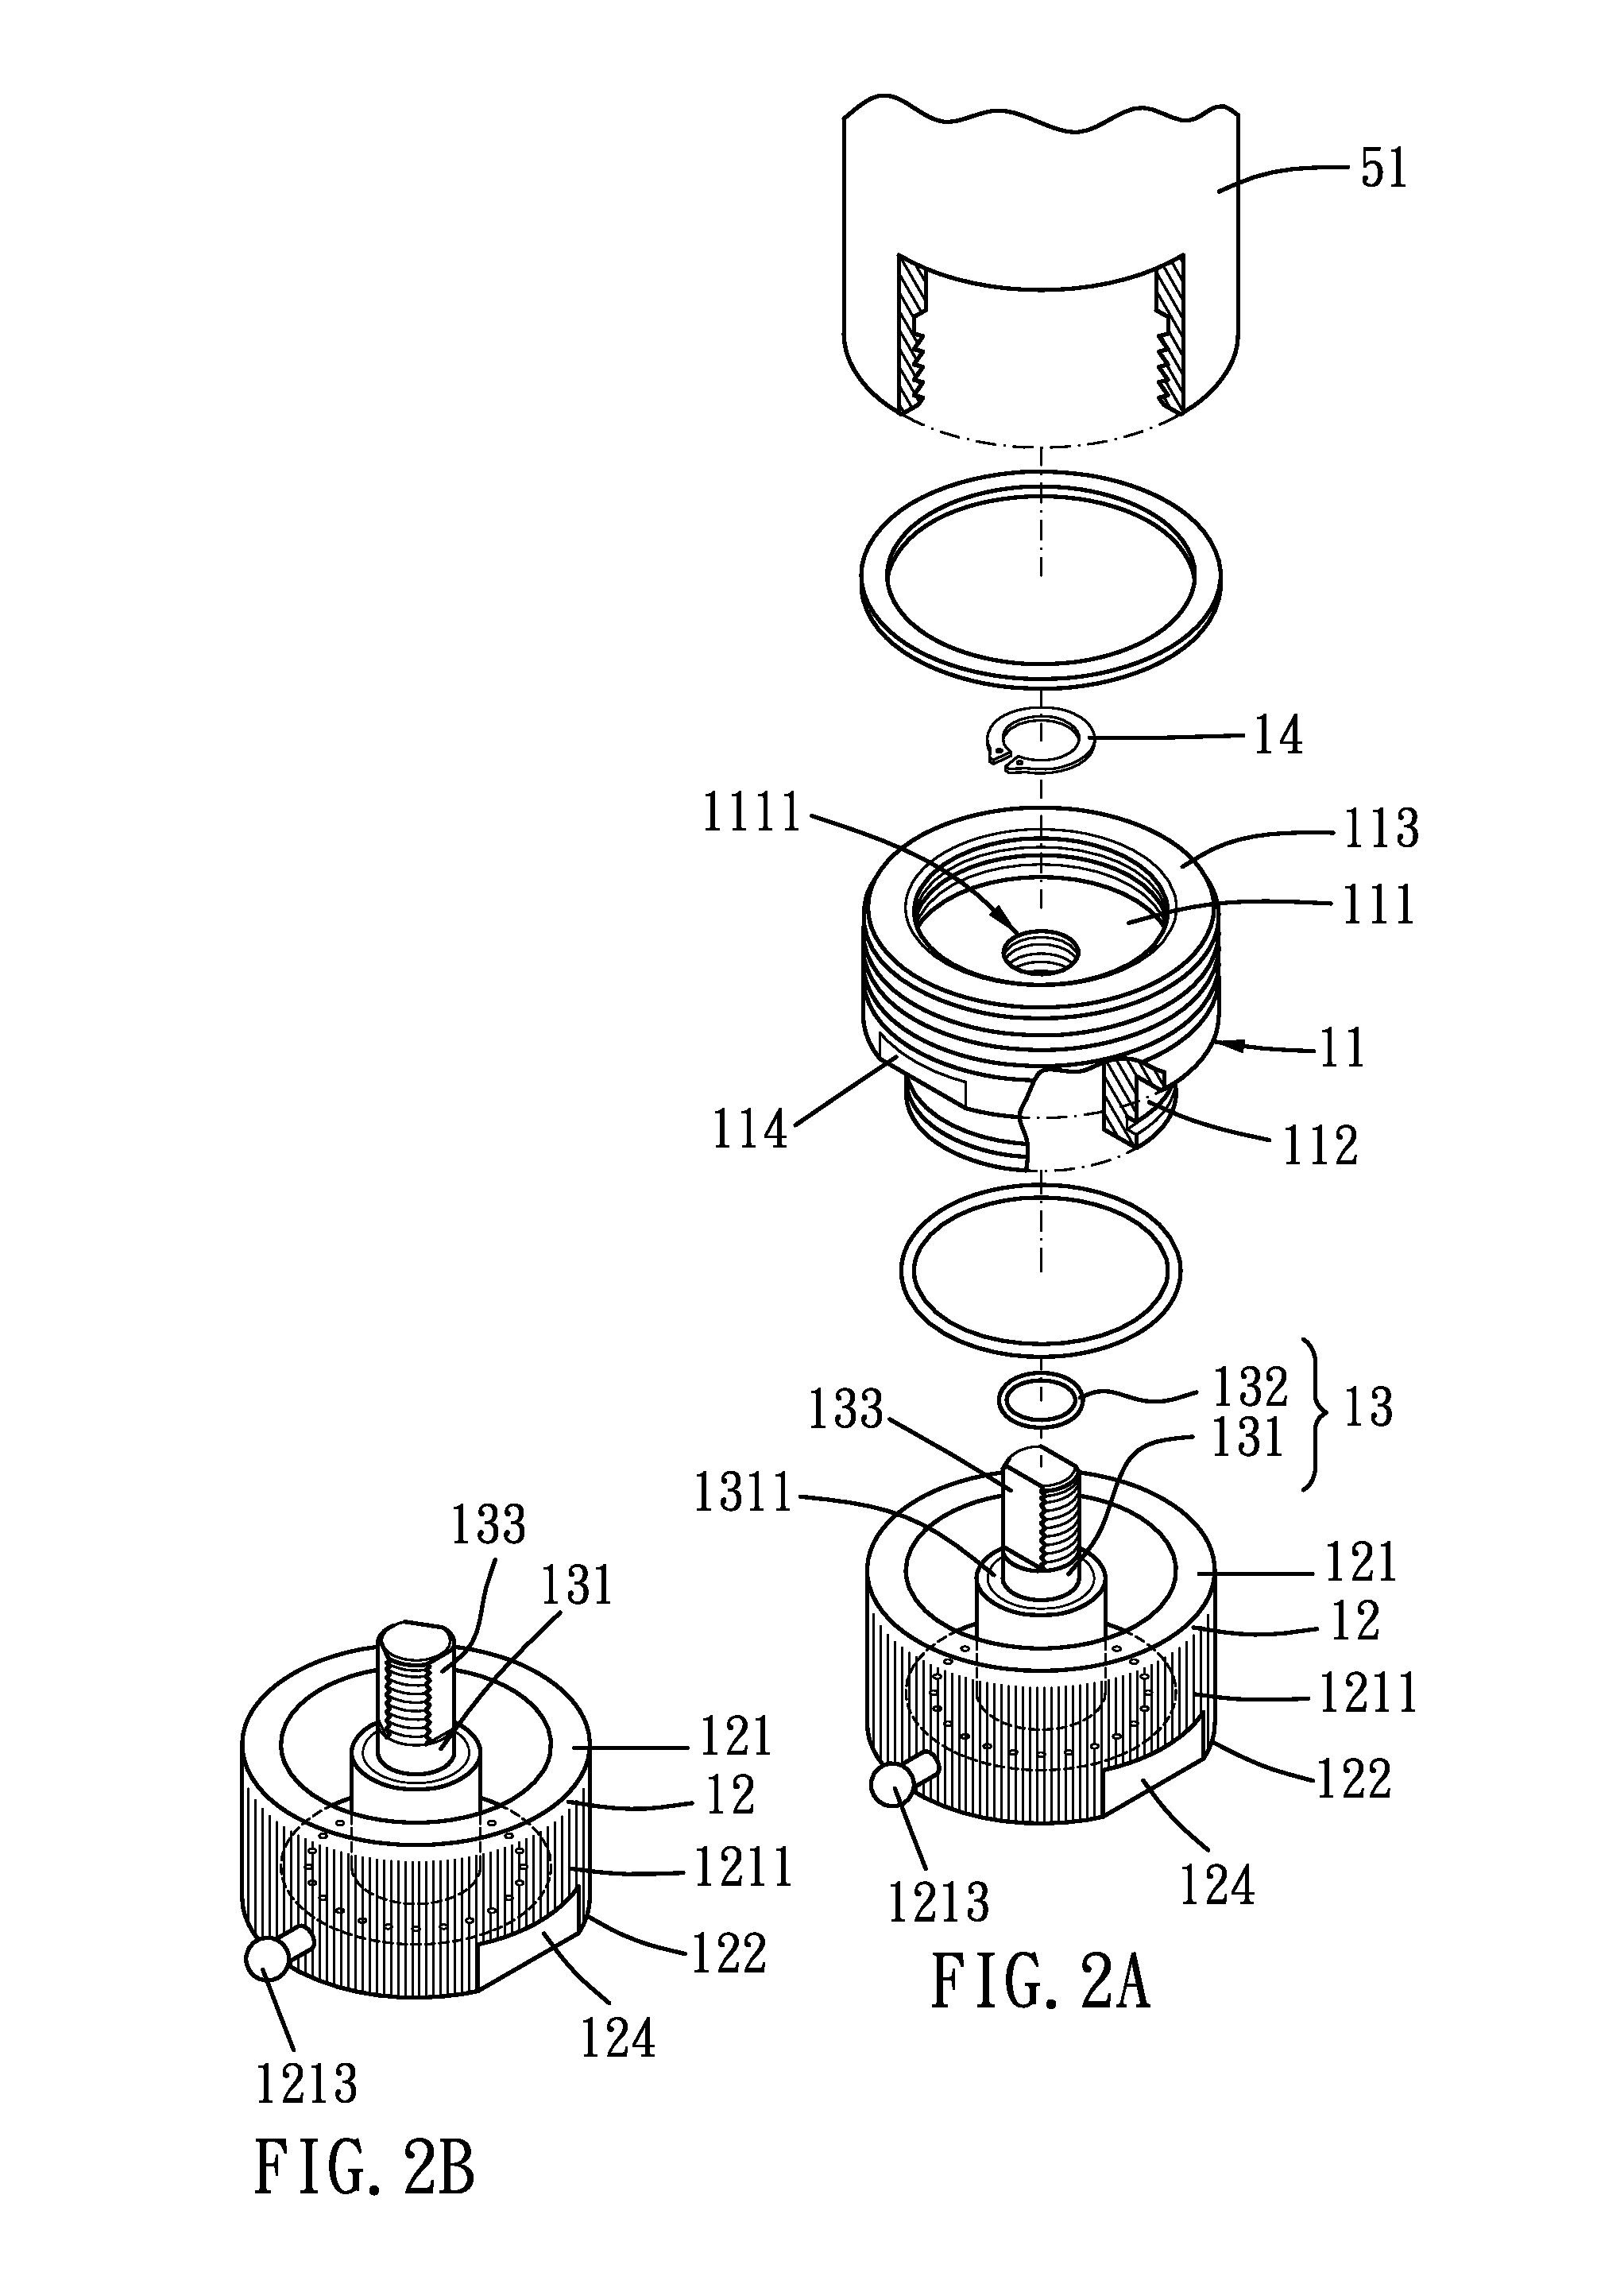 Control valve for a water tap